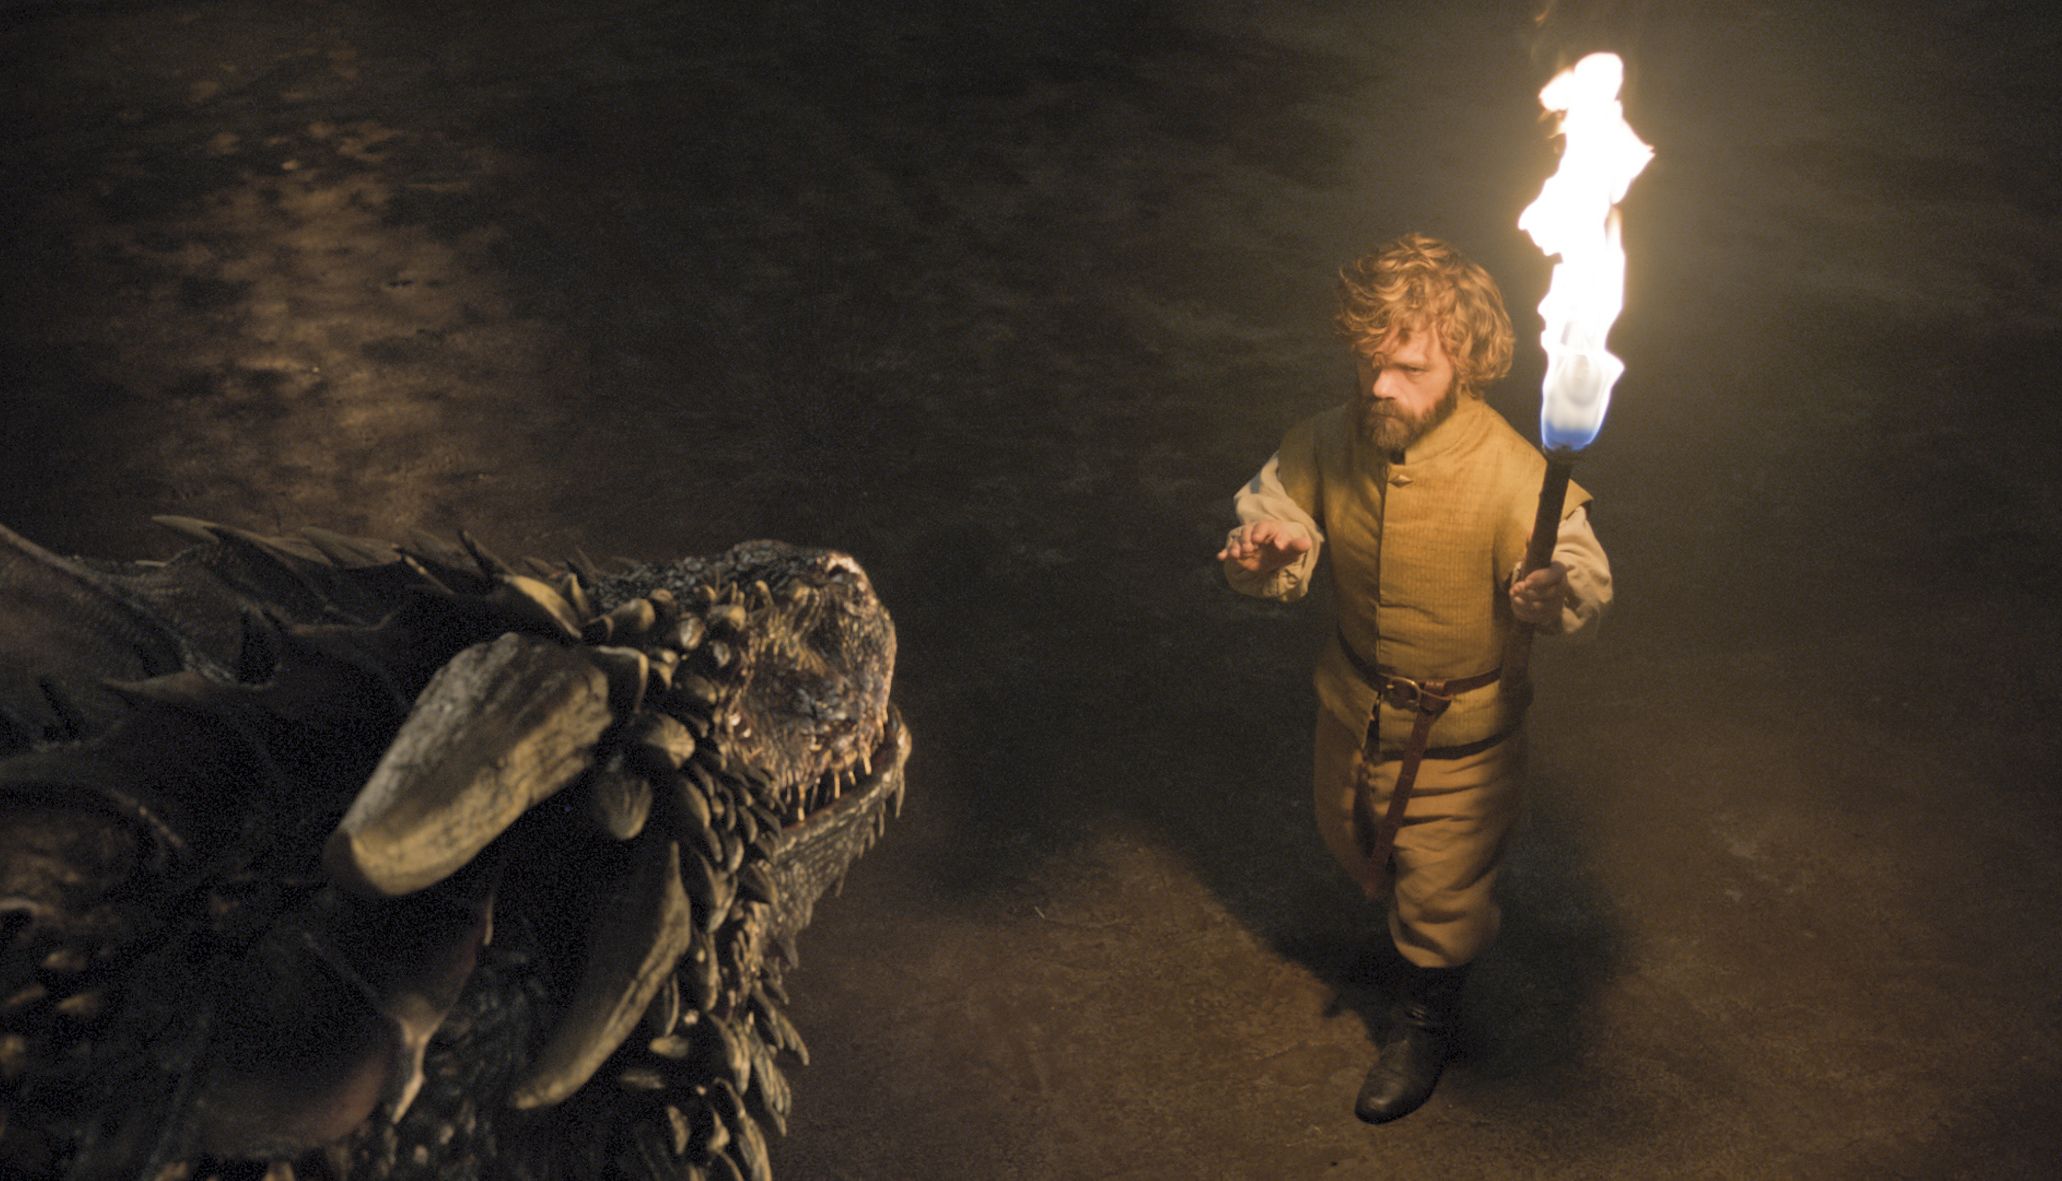 7-things-you-might-have-missed-in-game-of-thrones-season-6-episode-2-959344